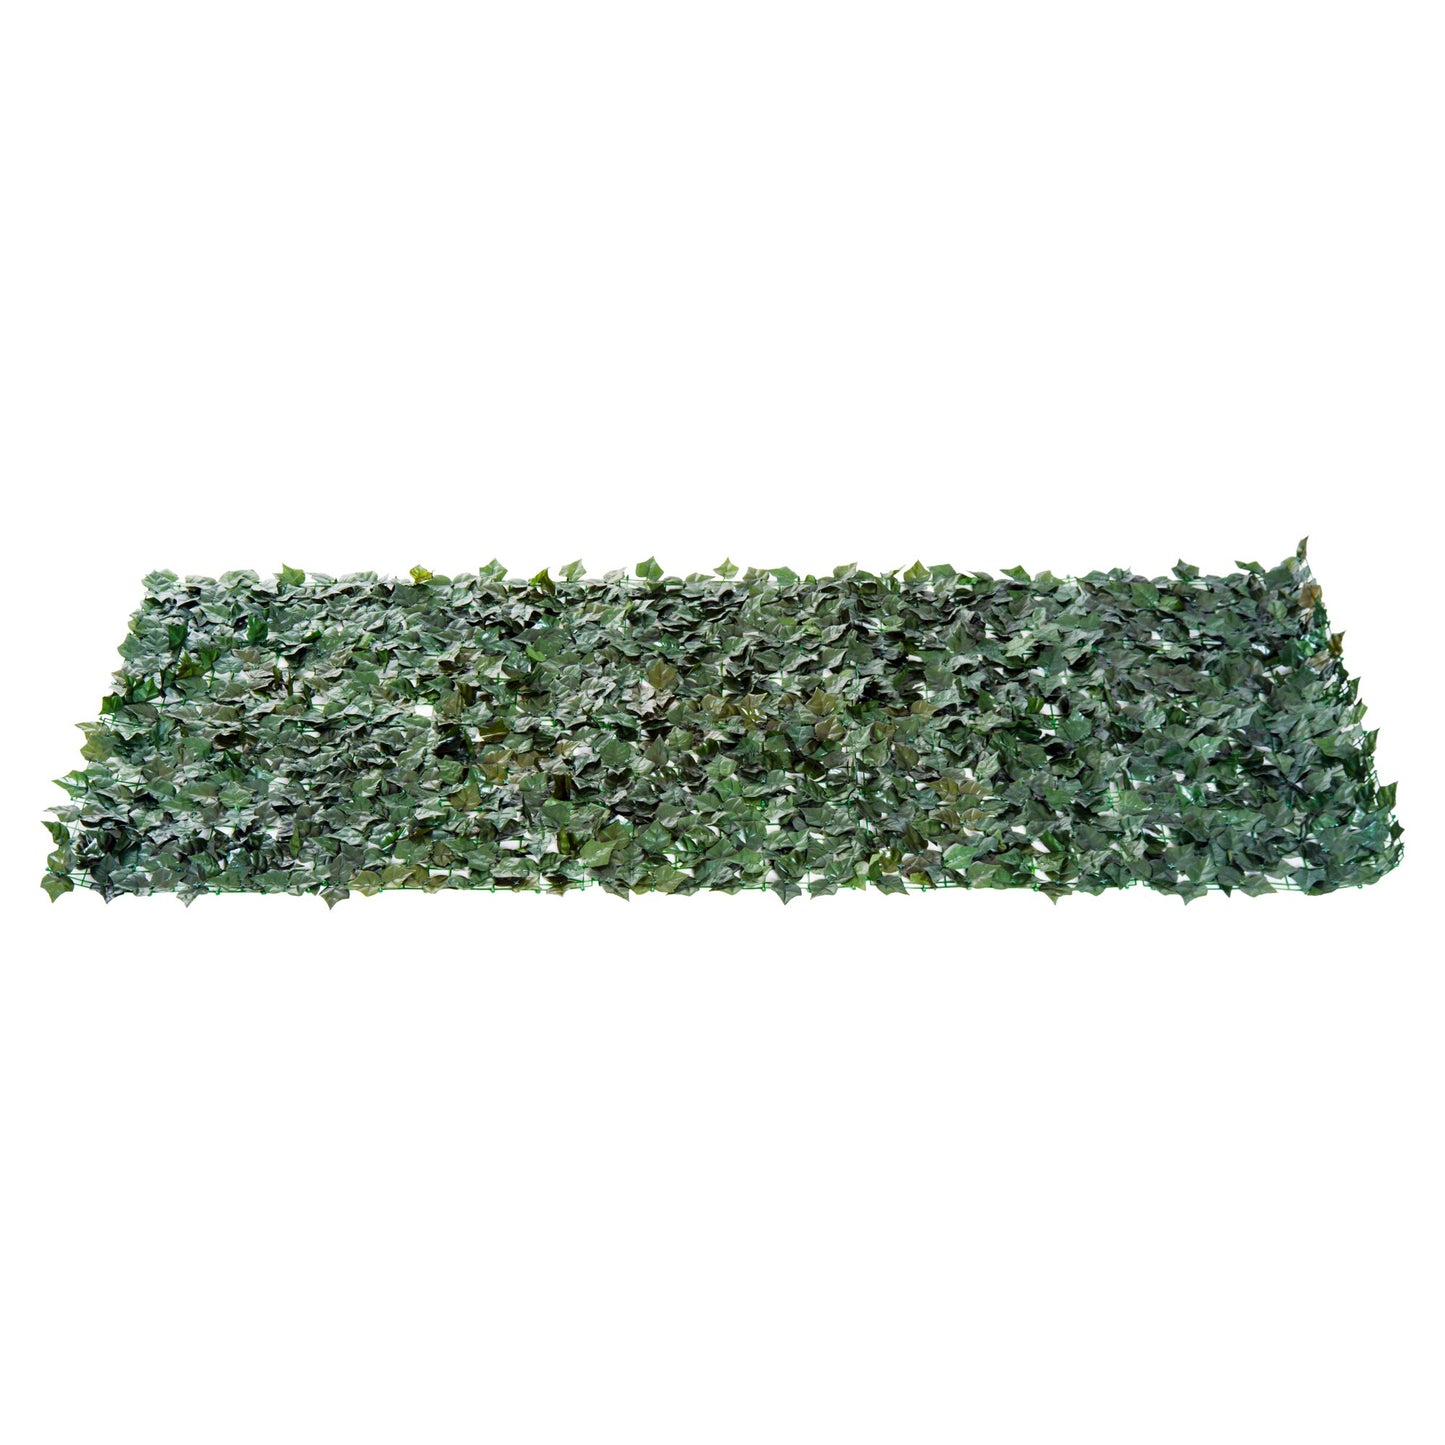 Outsunny Artificial Leaf Screen Panel, 3x1 m-Dark Green